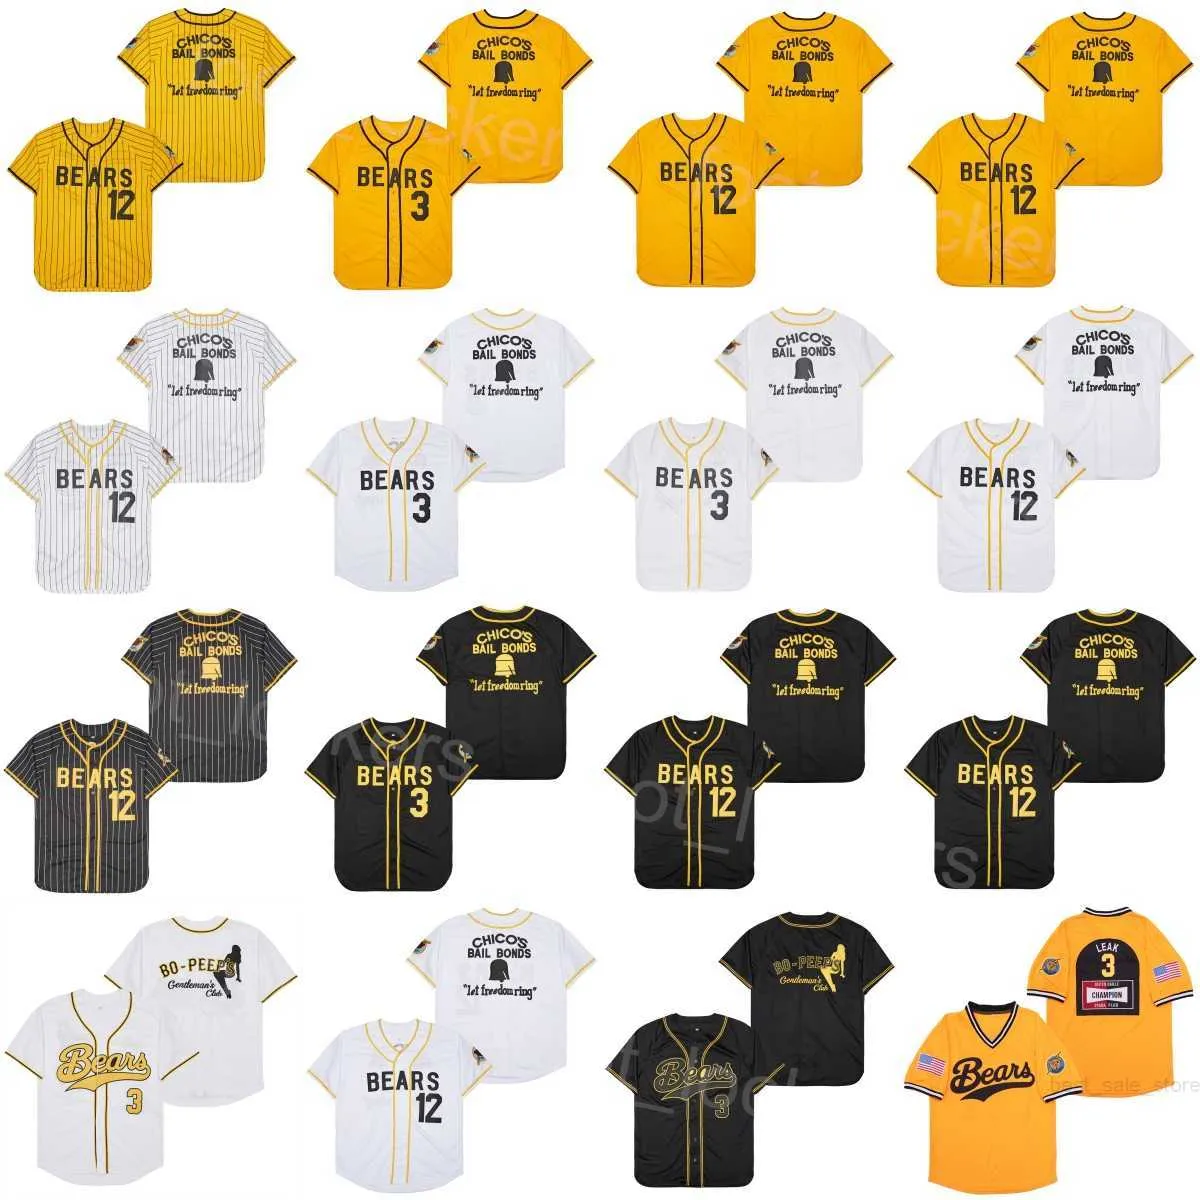 Moive The Bad News Bears Jerseys Baseball Film 12 Tanner Boyle 3 Kelly Leak Pullover Cooperstown Retro Cool Base Pinstripe University All Stitched For Sport Fans